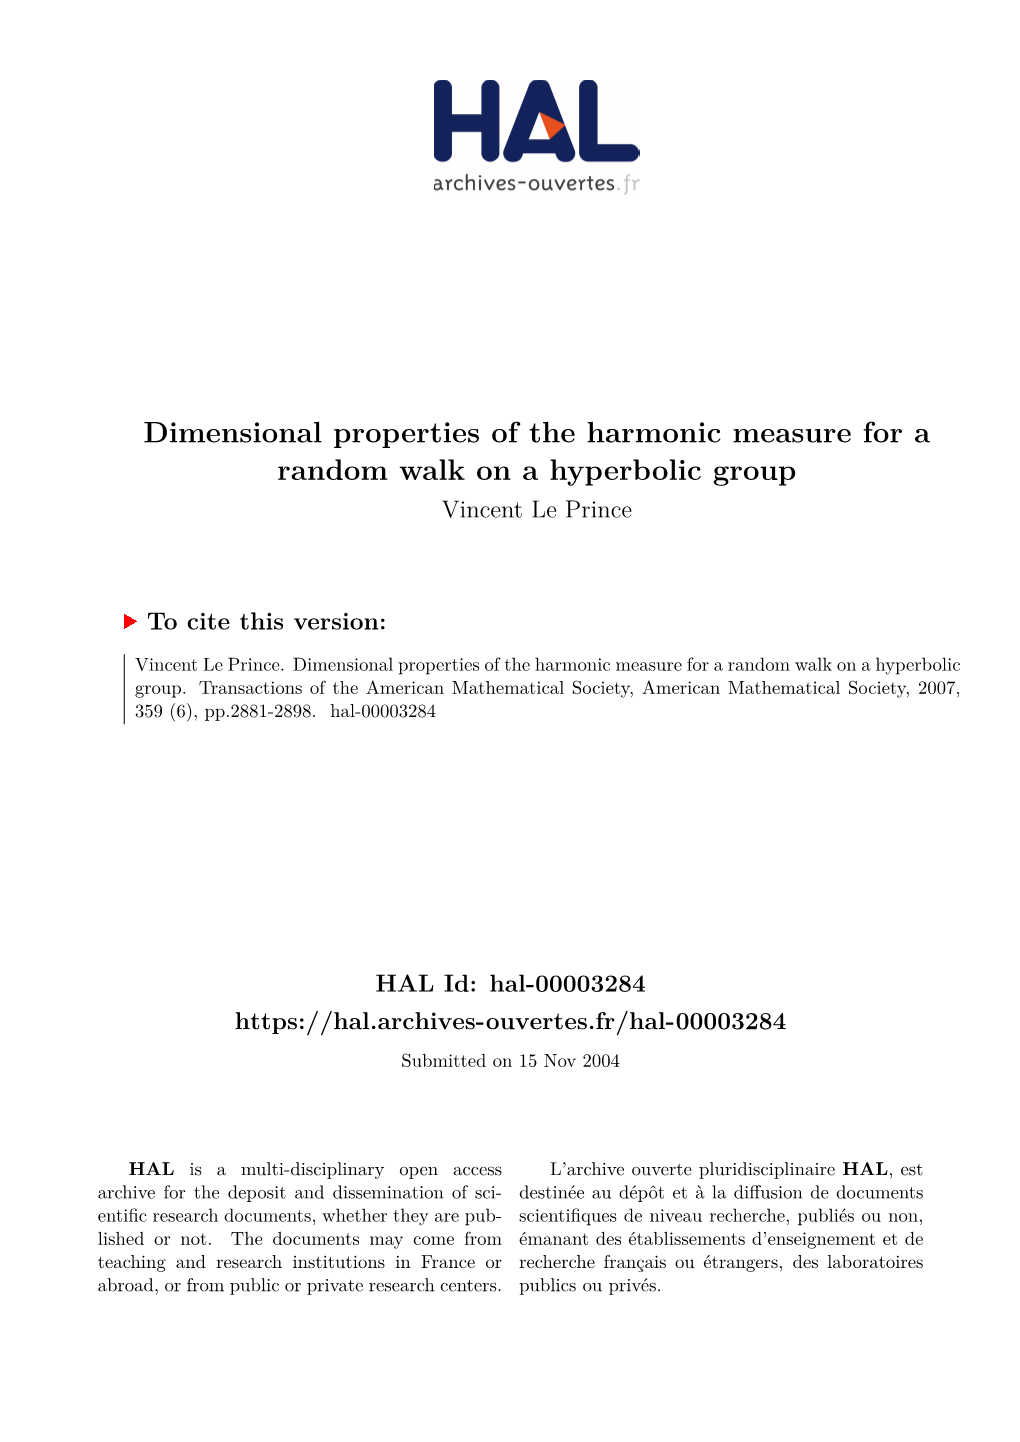 Dimensional Properties of the Harmonic Measure for a Random Walk on a Hyperbolic Group Vincent Le Prince